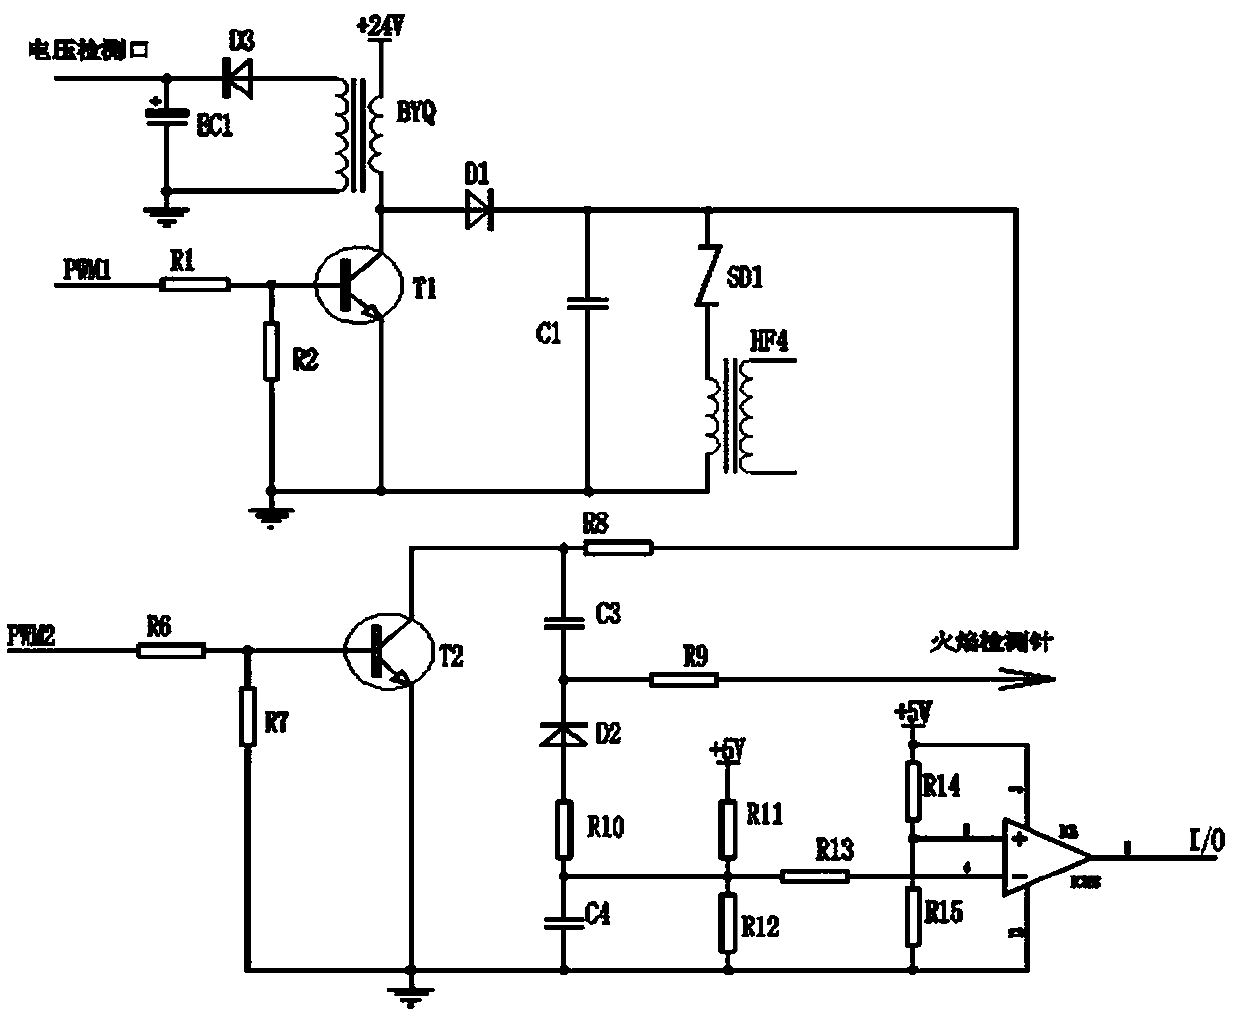 Ignition and fire detection circuit based on BOOST principle and gas wall-hanging stove.